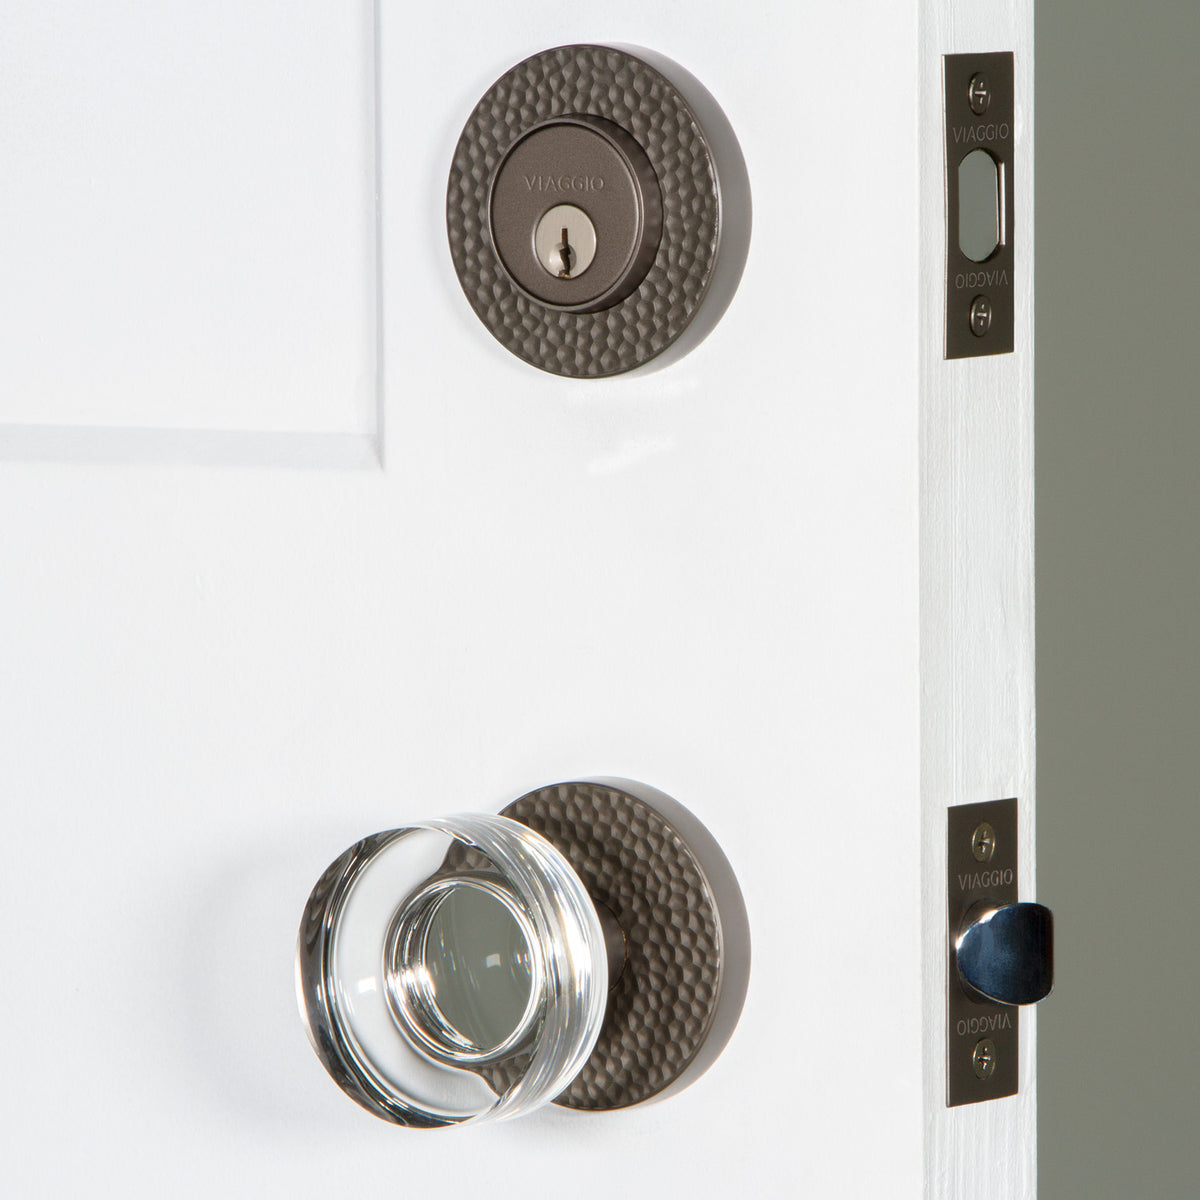 Circolo Hammered Rosette Entry Set with Circolo Crystal Knob in Titanium Gray